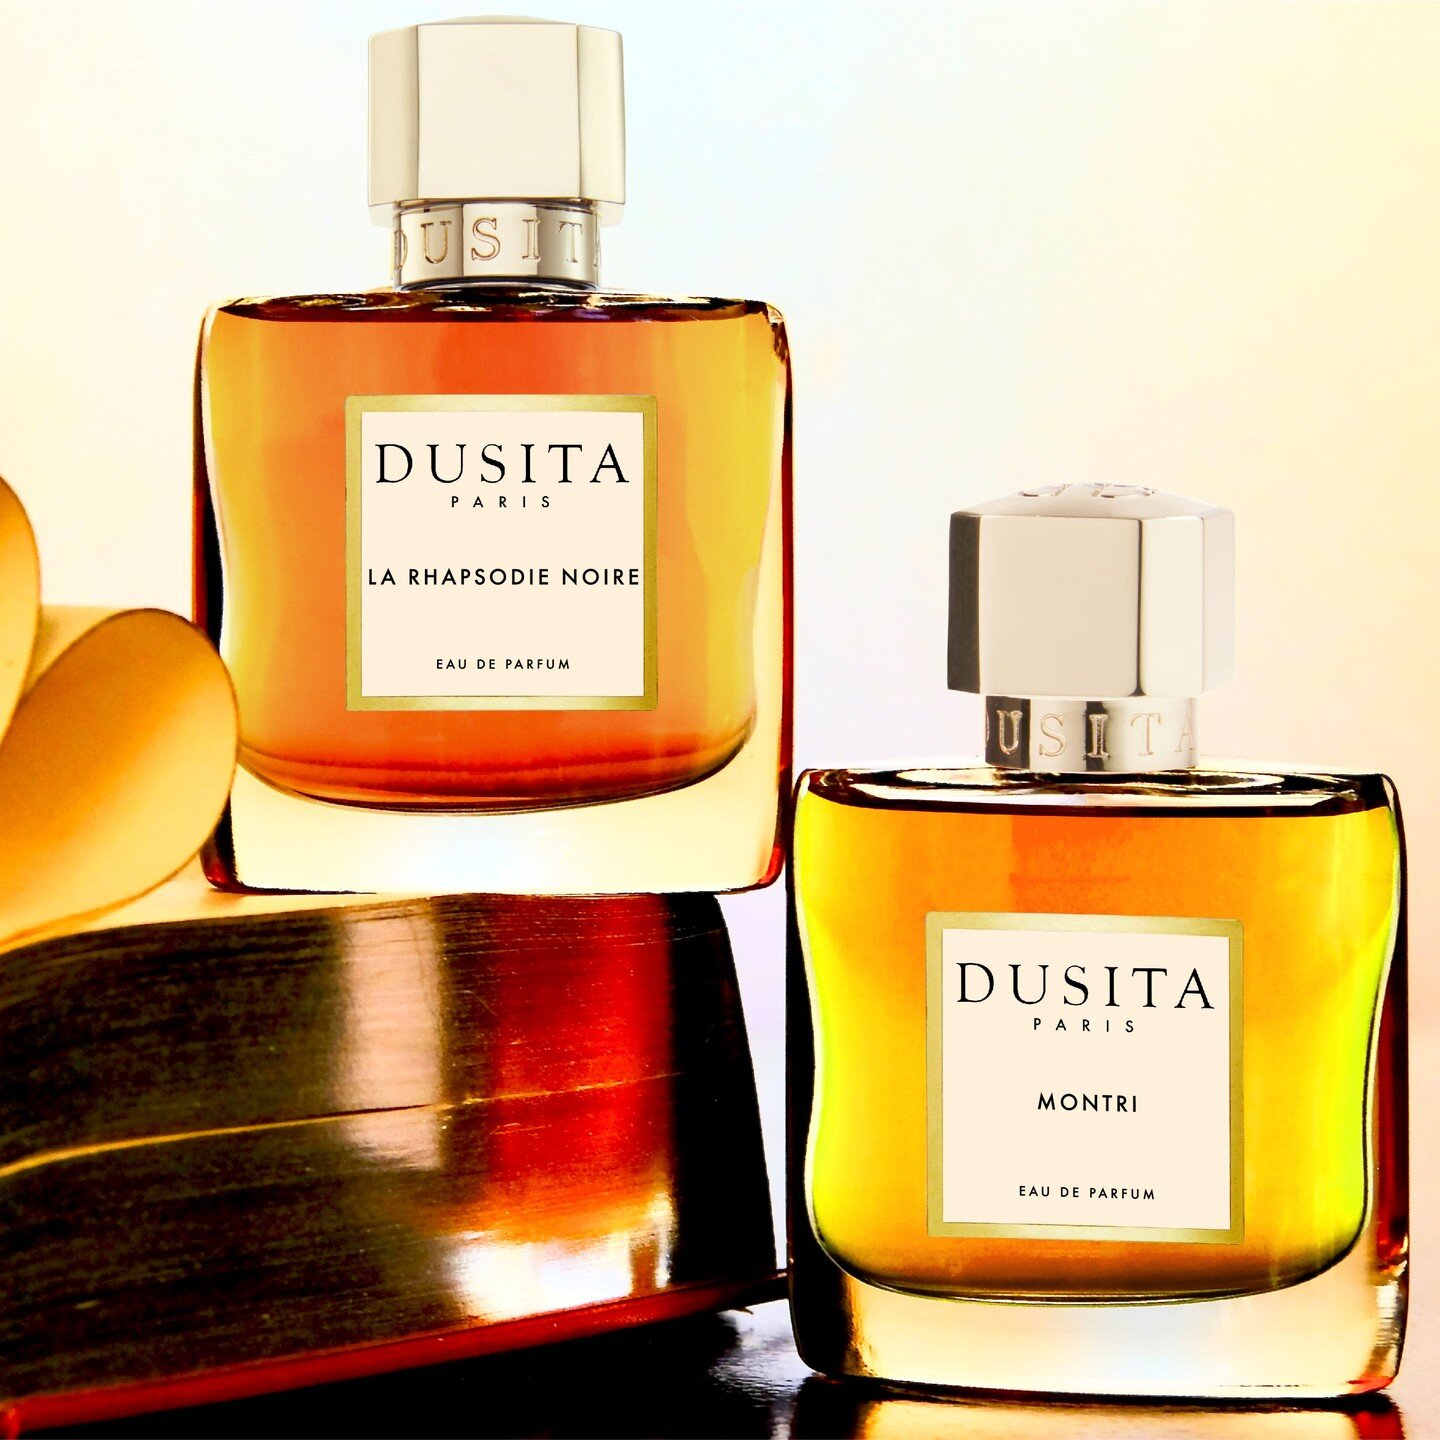 We have yet another thrilling announcement on #internationalfragranceday: we are so excited to announce that we are the new distributor for @parfumsdusita!

Parfums Dusita, launched in 2016 by self-taught perfumer Pissara Umavijani, presents fragranc